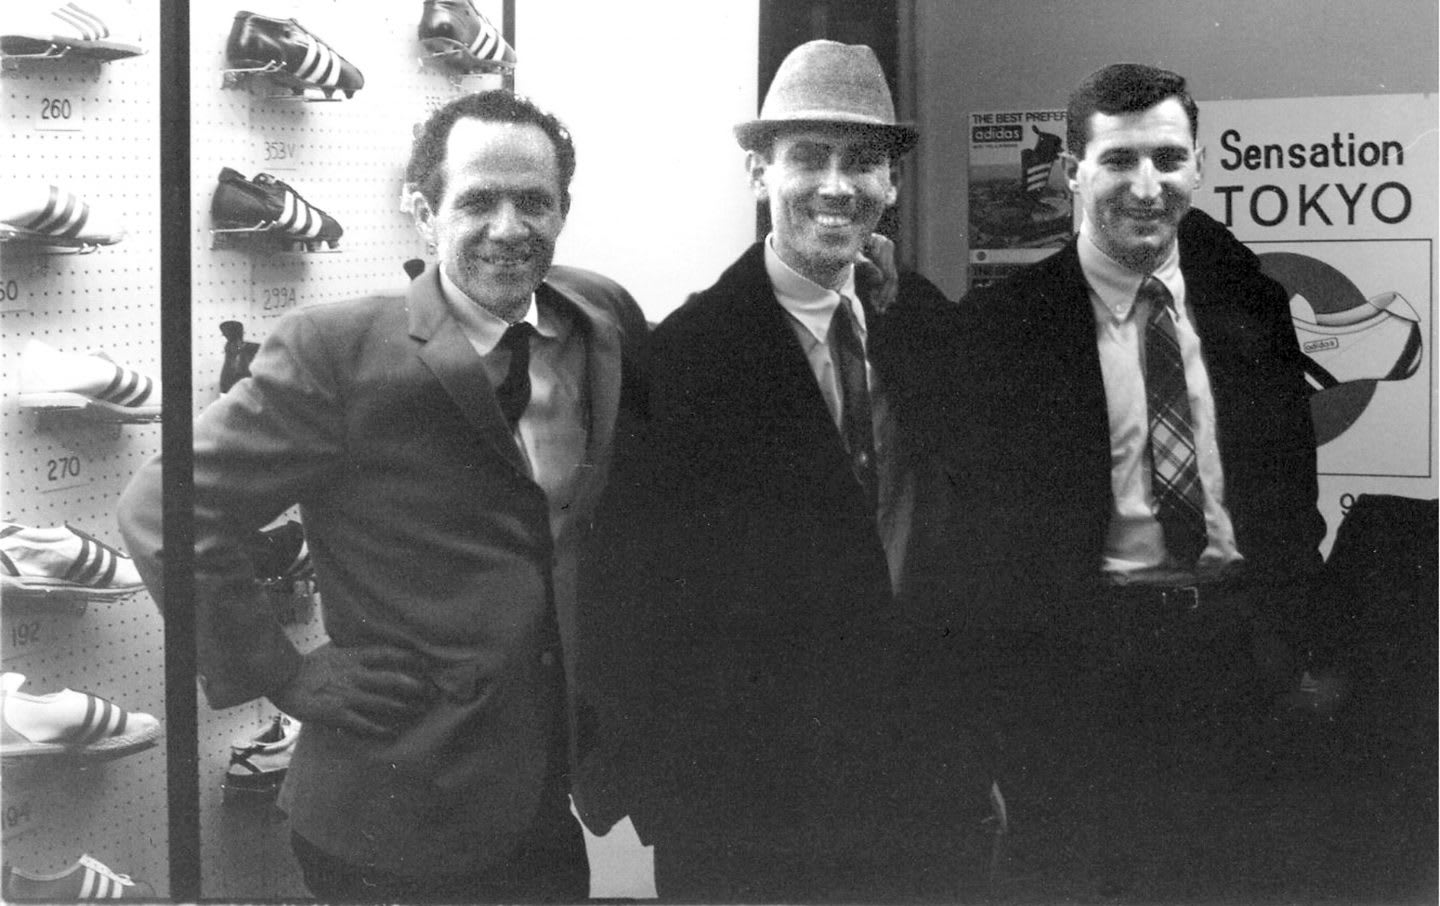 Black and white phtot of Horst Dassler with brothers Clifford and Chris Severn at the 1965 National Sporting Goods Association show in Chicago.